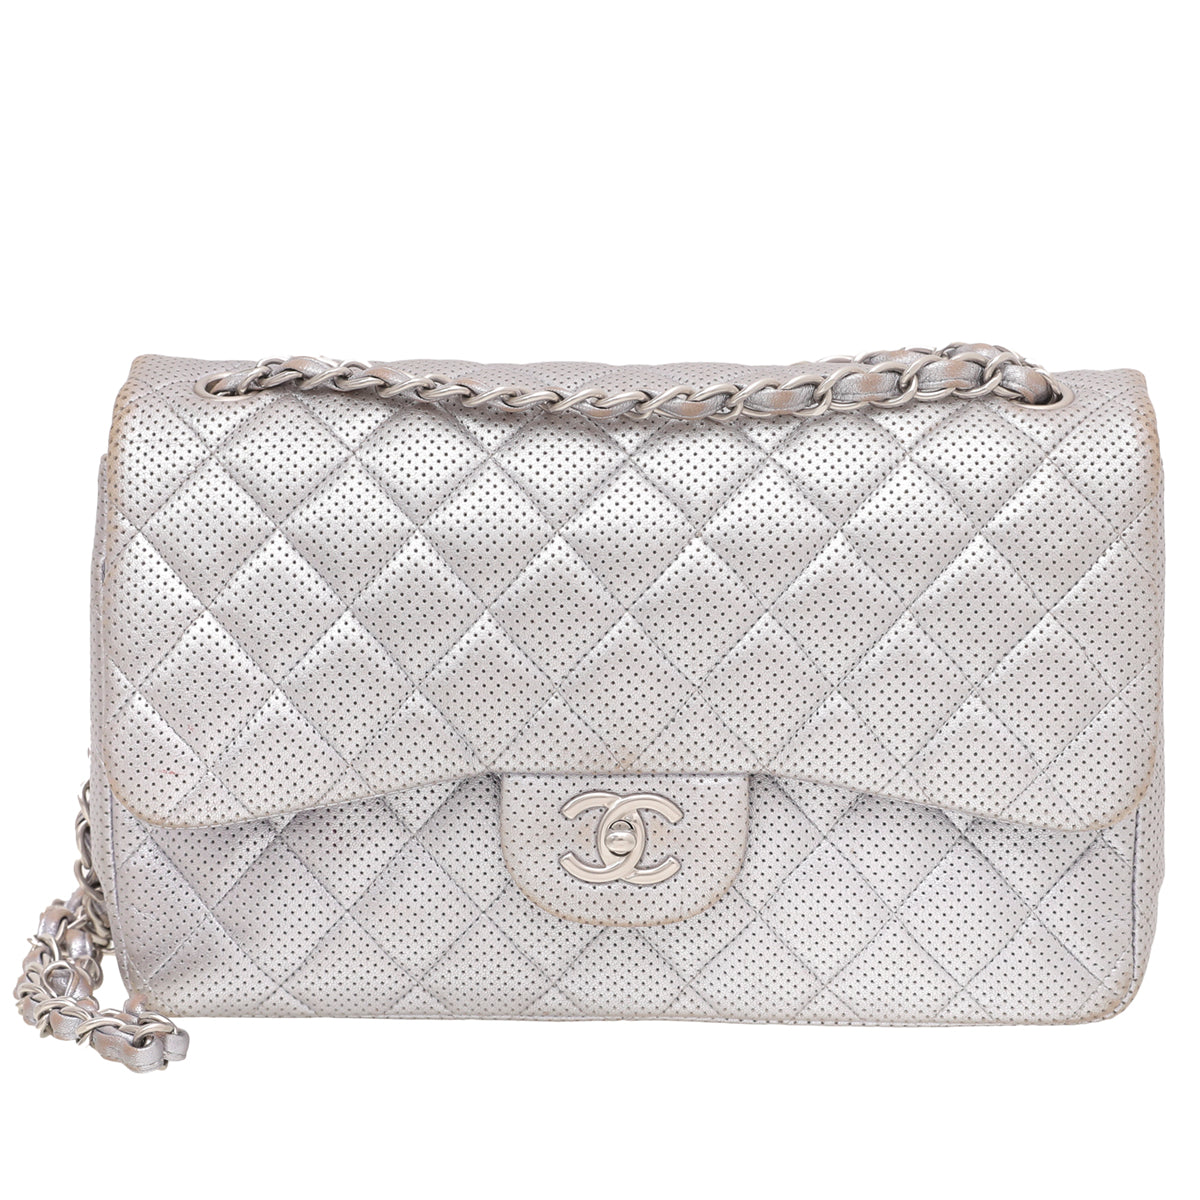 Chanel Silver CC Perforated Classic Double Flap Bag